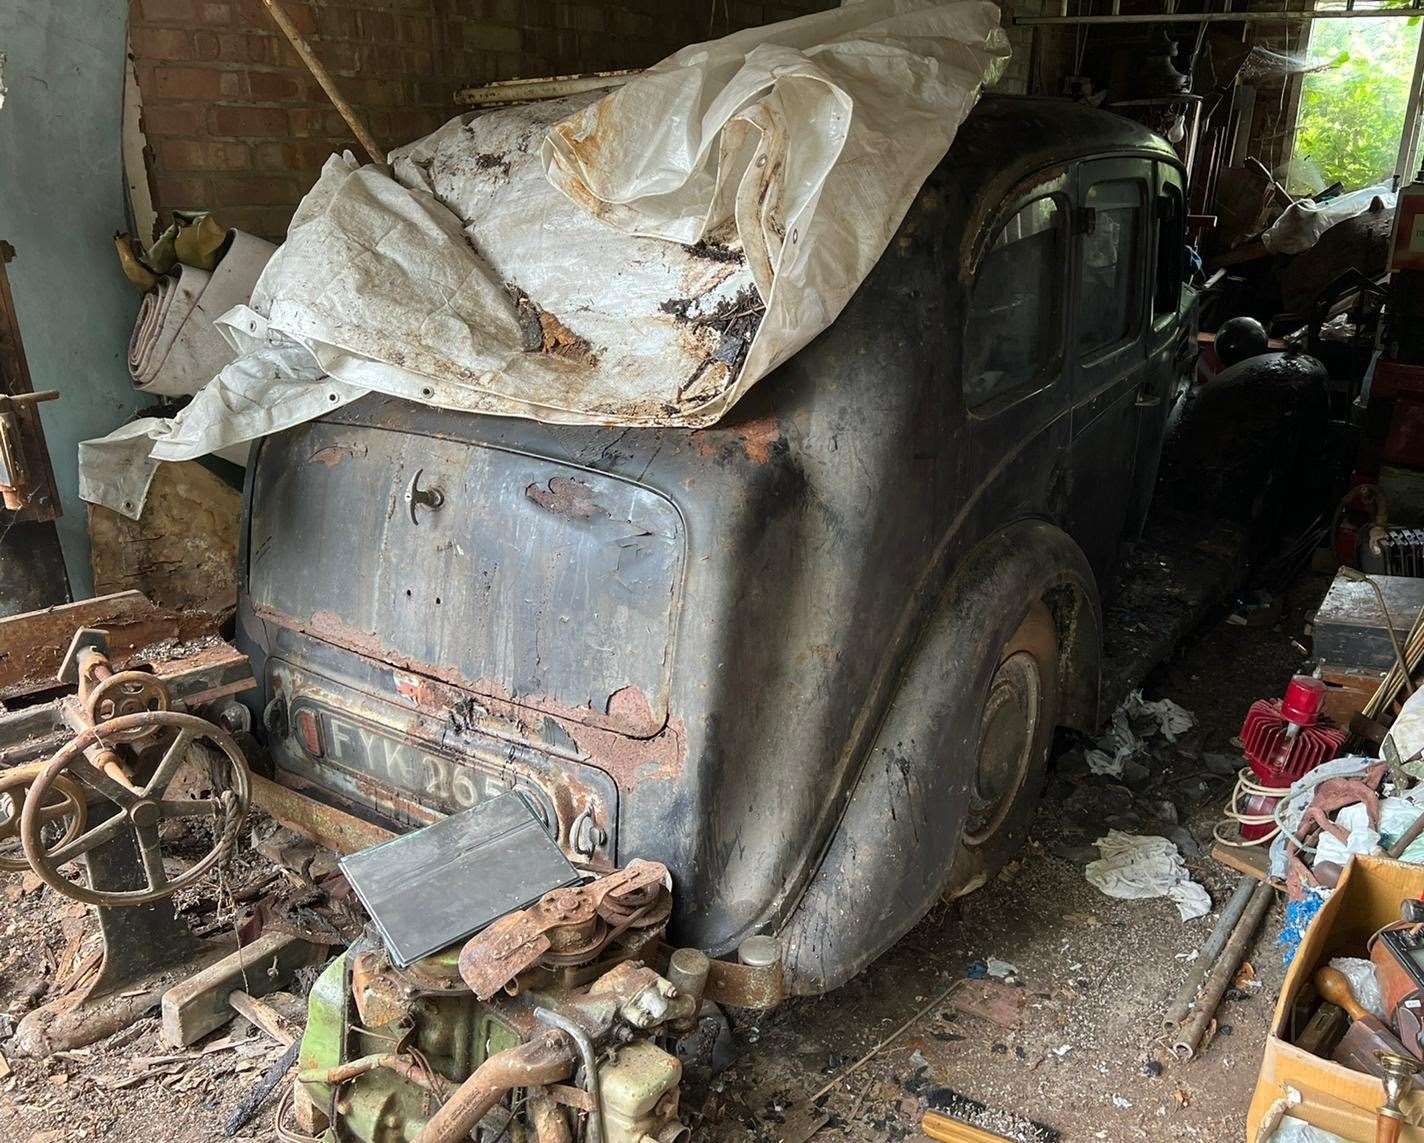 The Wolseley 14/60 is in need of restoration. Credit: Hansons